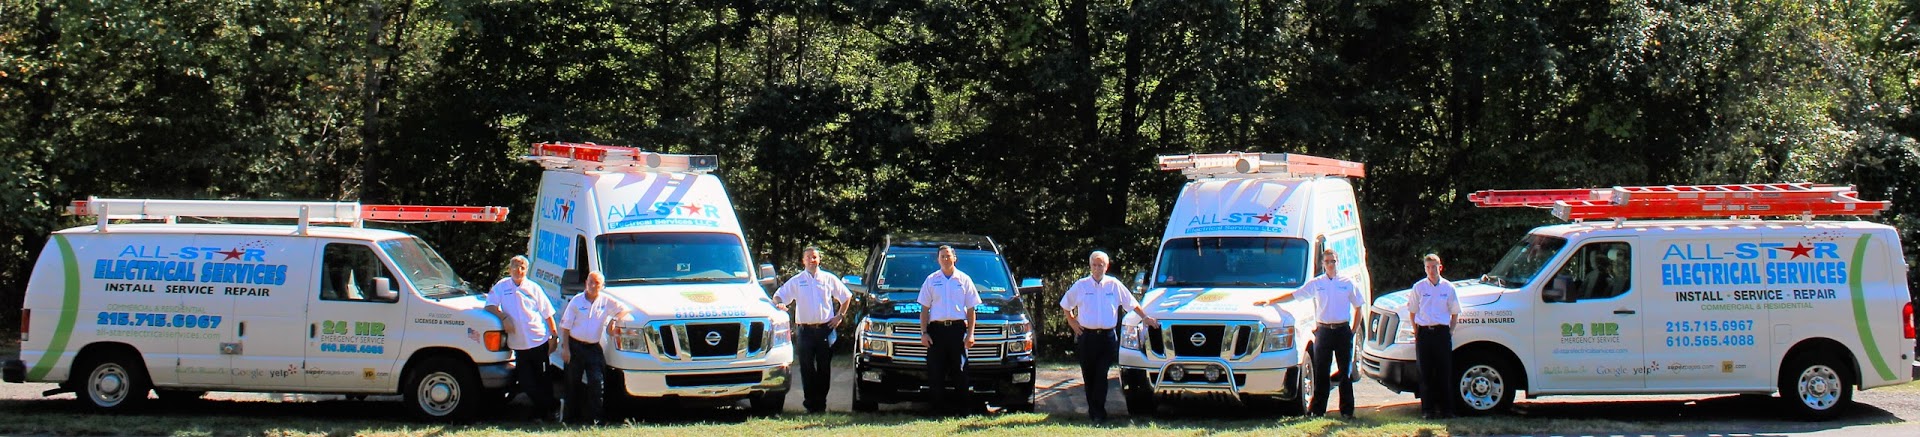 The men from All Star Electrical Services, LLC posing with their fleet of vans